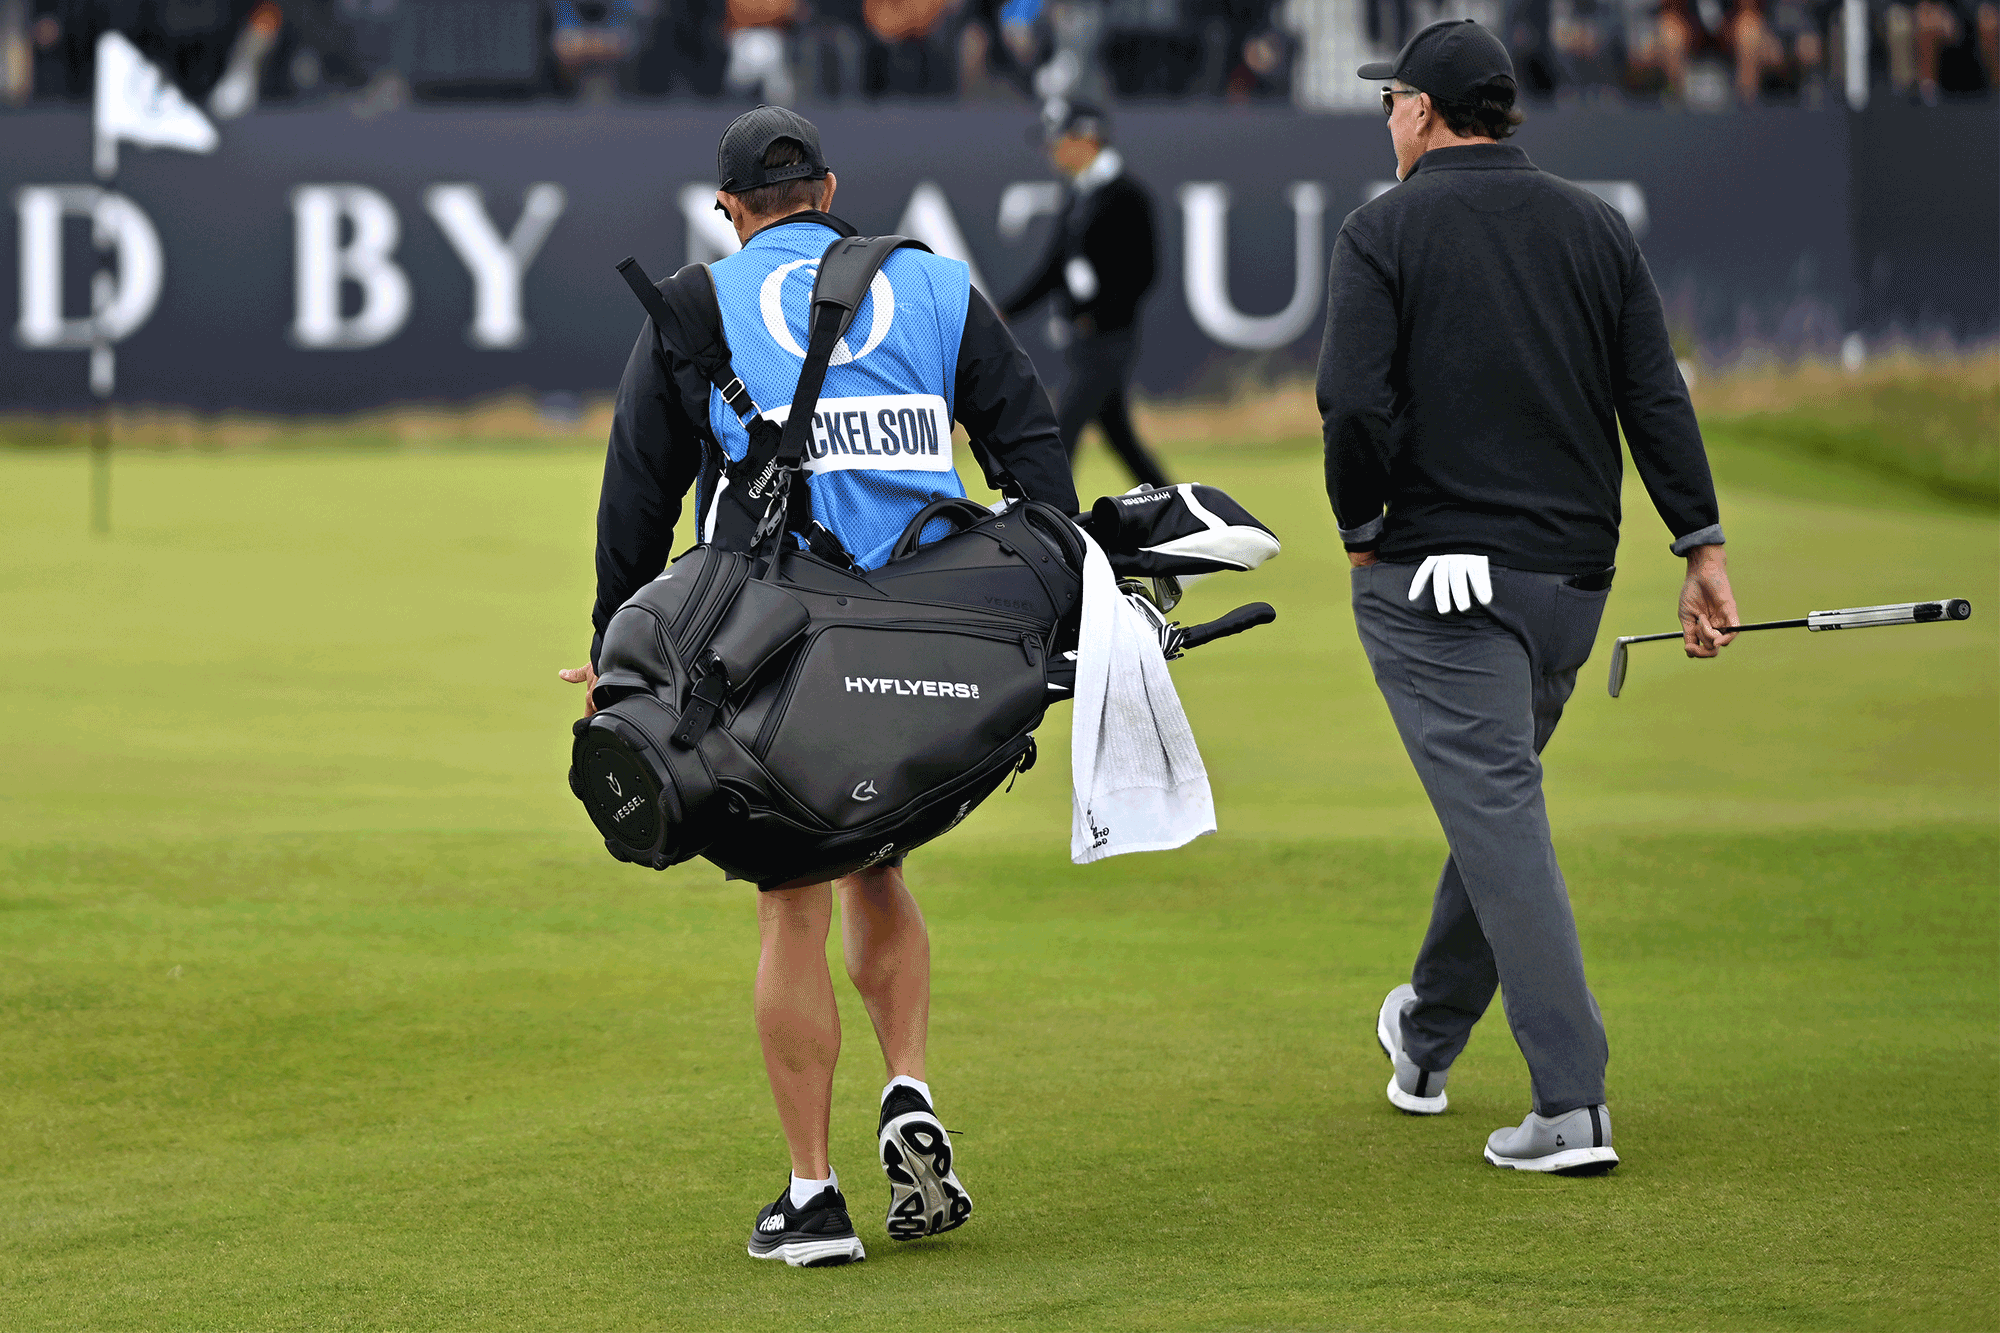 stå Forfærdeligt marmorering Phil Mickelson WITB: What's in Phil Mickelson's bag? - National Club Golfer